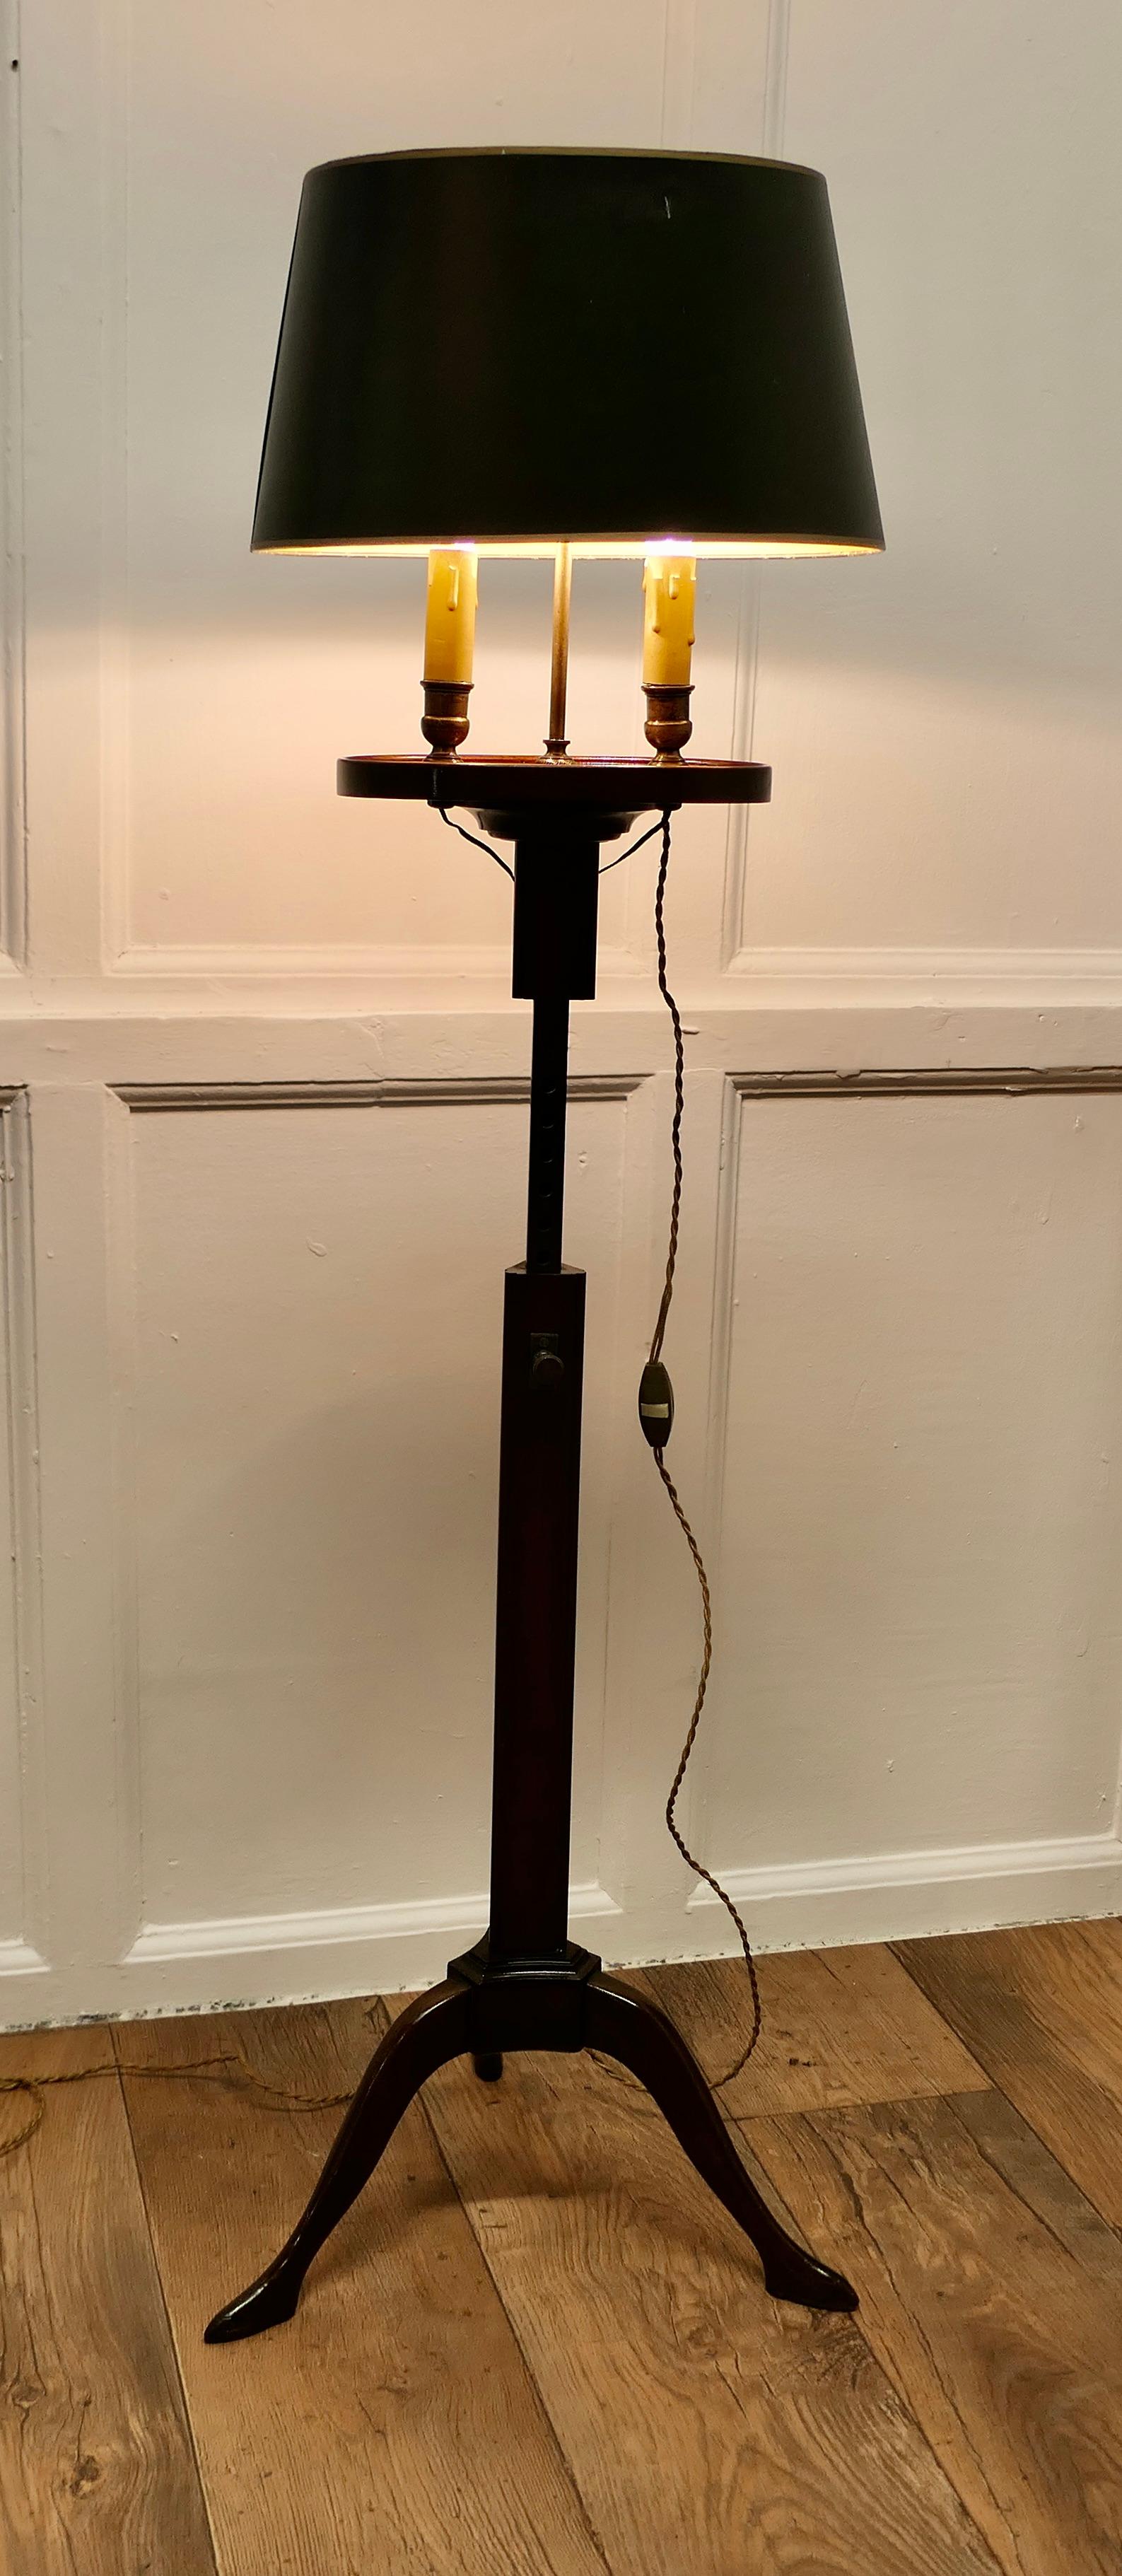 Bouillotte Floor Lamp, Adjustable Twin Candle Lamp

This is an Elegant piece, originally the lamp would have been candle powered, this one has been converted to electricity 
The lamp stands on a 3 footed base, with lovely detailed carving showing